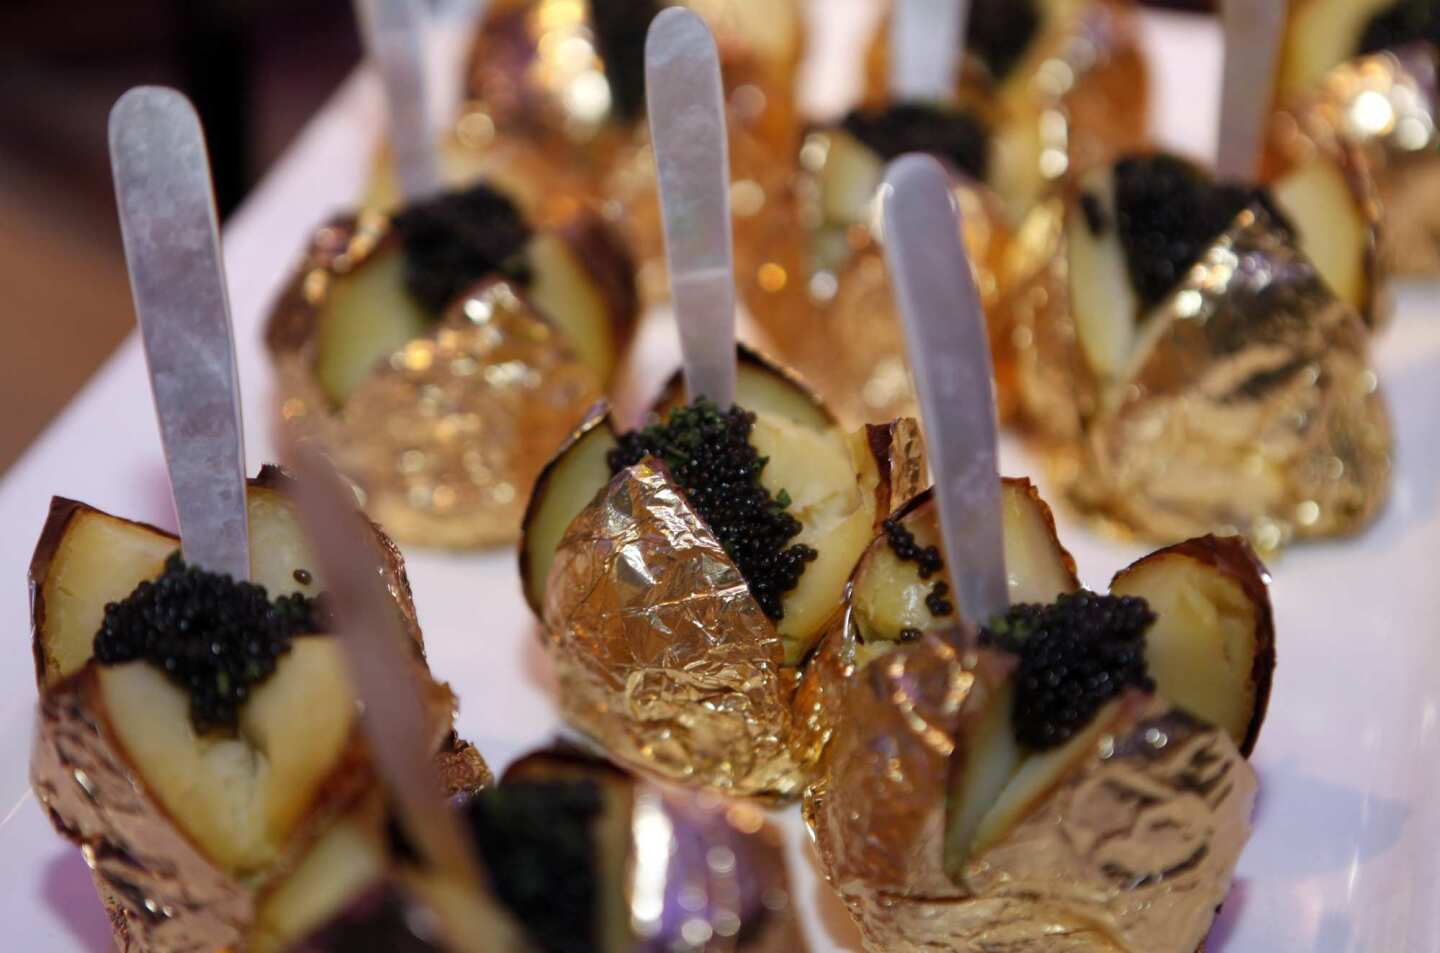 Gold-wrapped baked potatoes are garnished with caviar and crème fraiche.